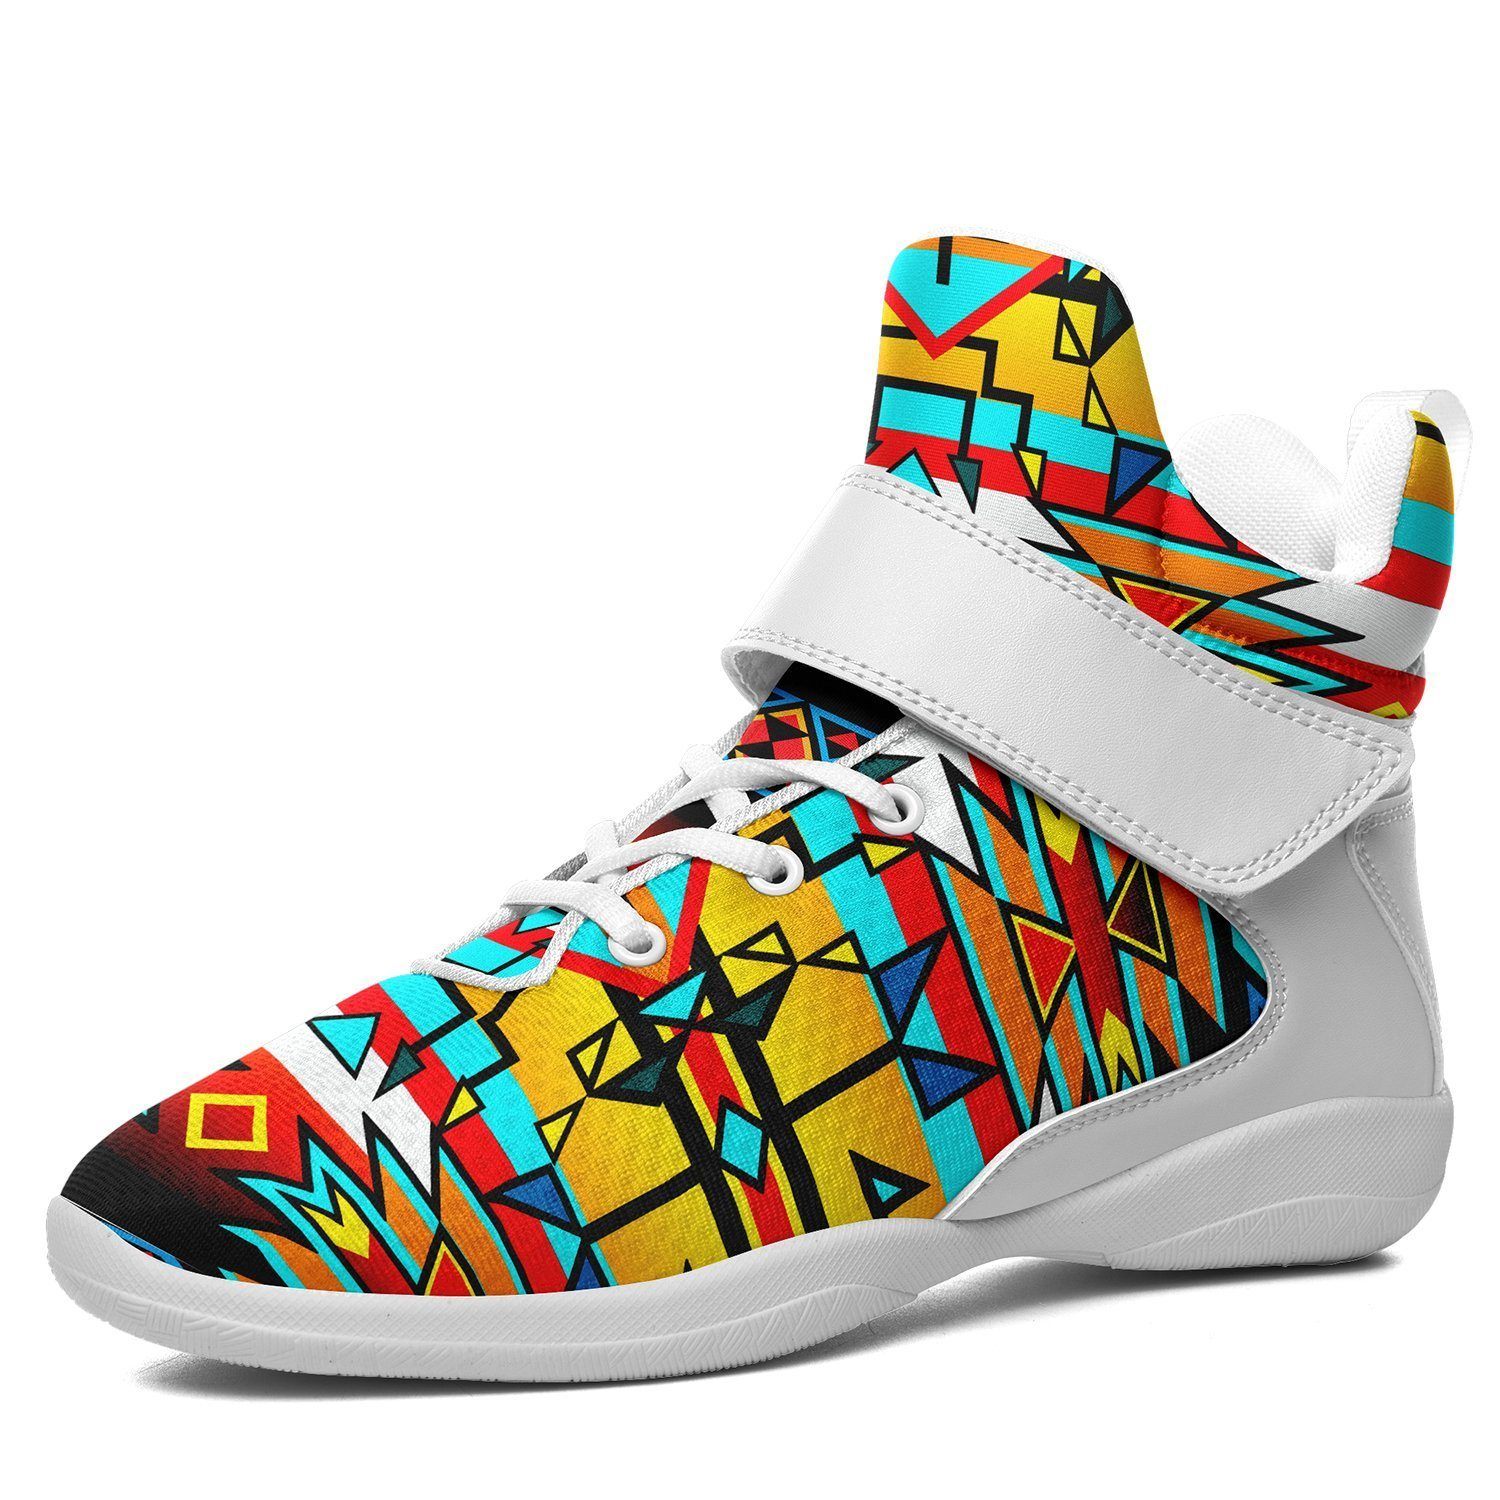 Force of Nature Twister Kid's Ipottaa Basketball / Sport High Top Shoes 49 Dzine US Child 12.5 / EUR 30 White Sole with White Strap 